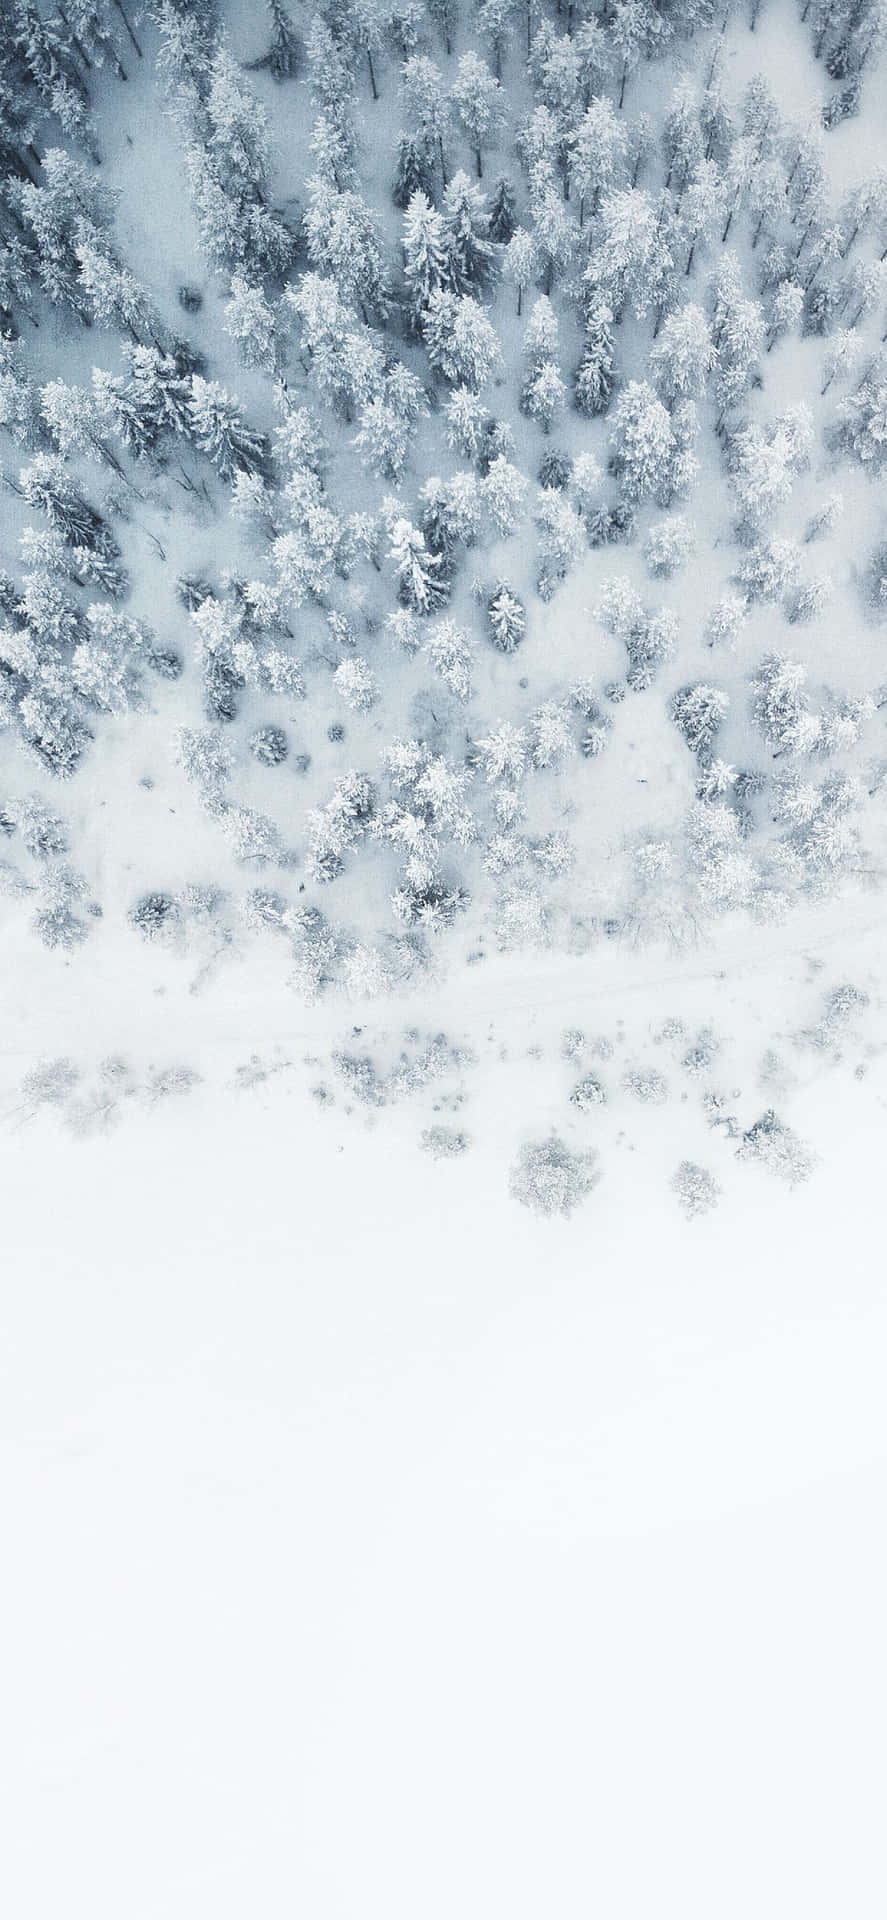 Iphone White Snowy Forest Wallpaper